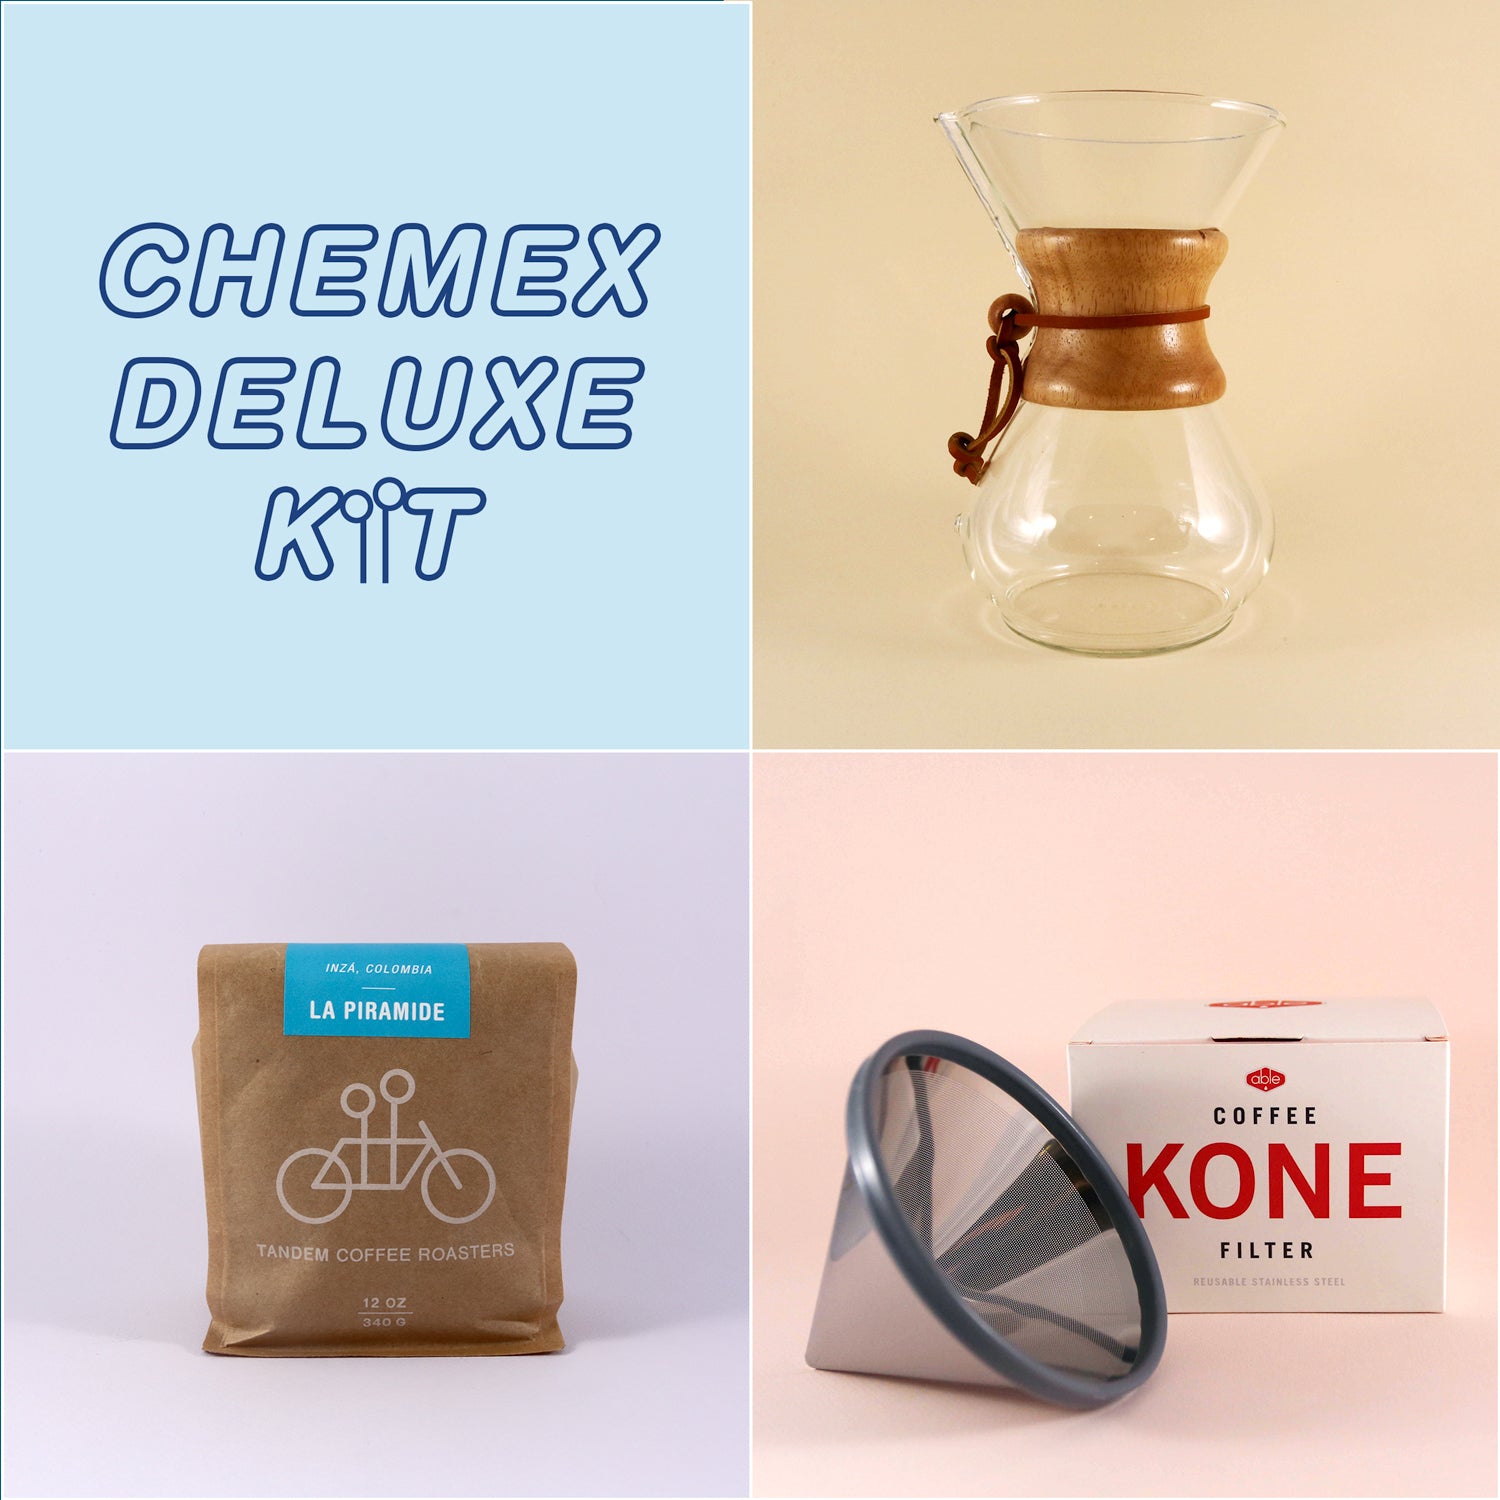 Collage of four images: top left shows the text "Tandem Coffee Roasters Chemex Deluxe Kit", top right features a Chemex Brewer, bottom left displays a bag of "la primera" coffee, and bottom right